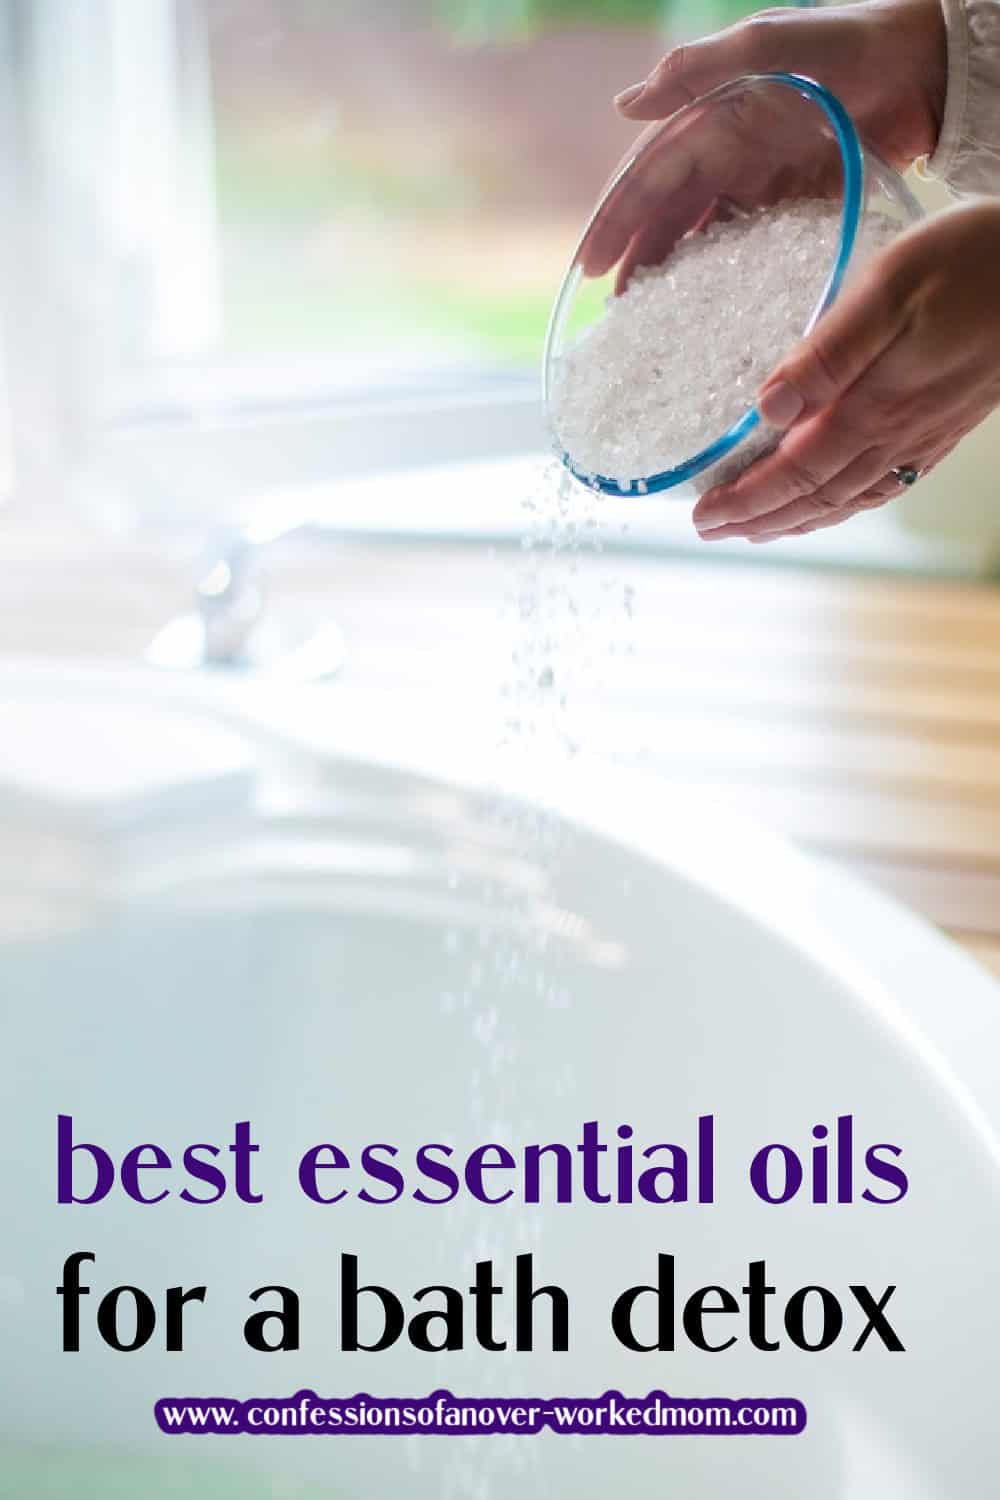 Take your bath time to the next level by adding a few essential oils. Here are the best essential oils for a detox bath to help remove toxins from your body.